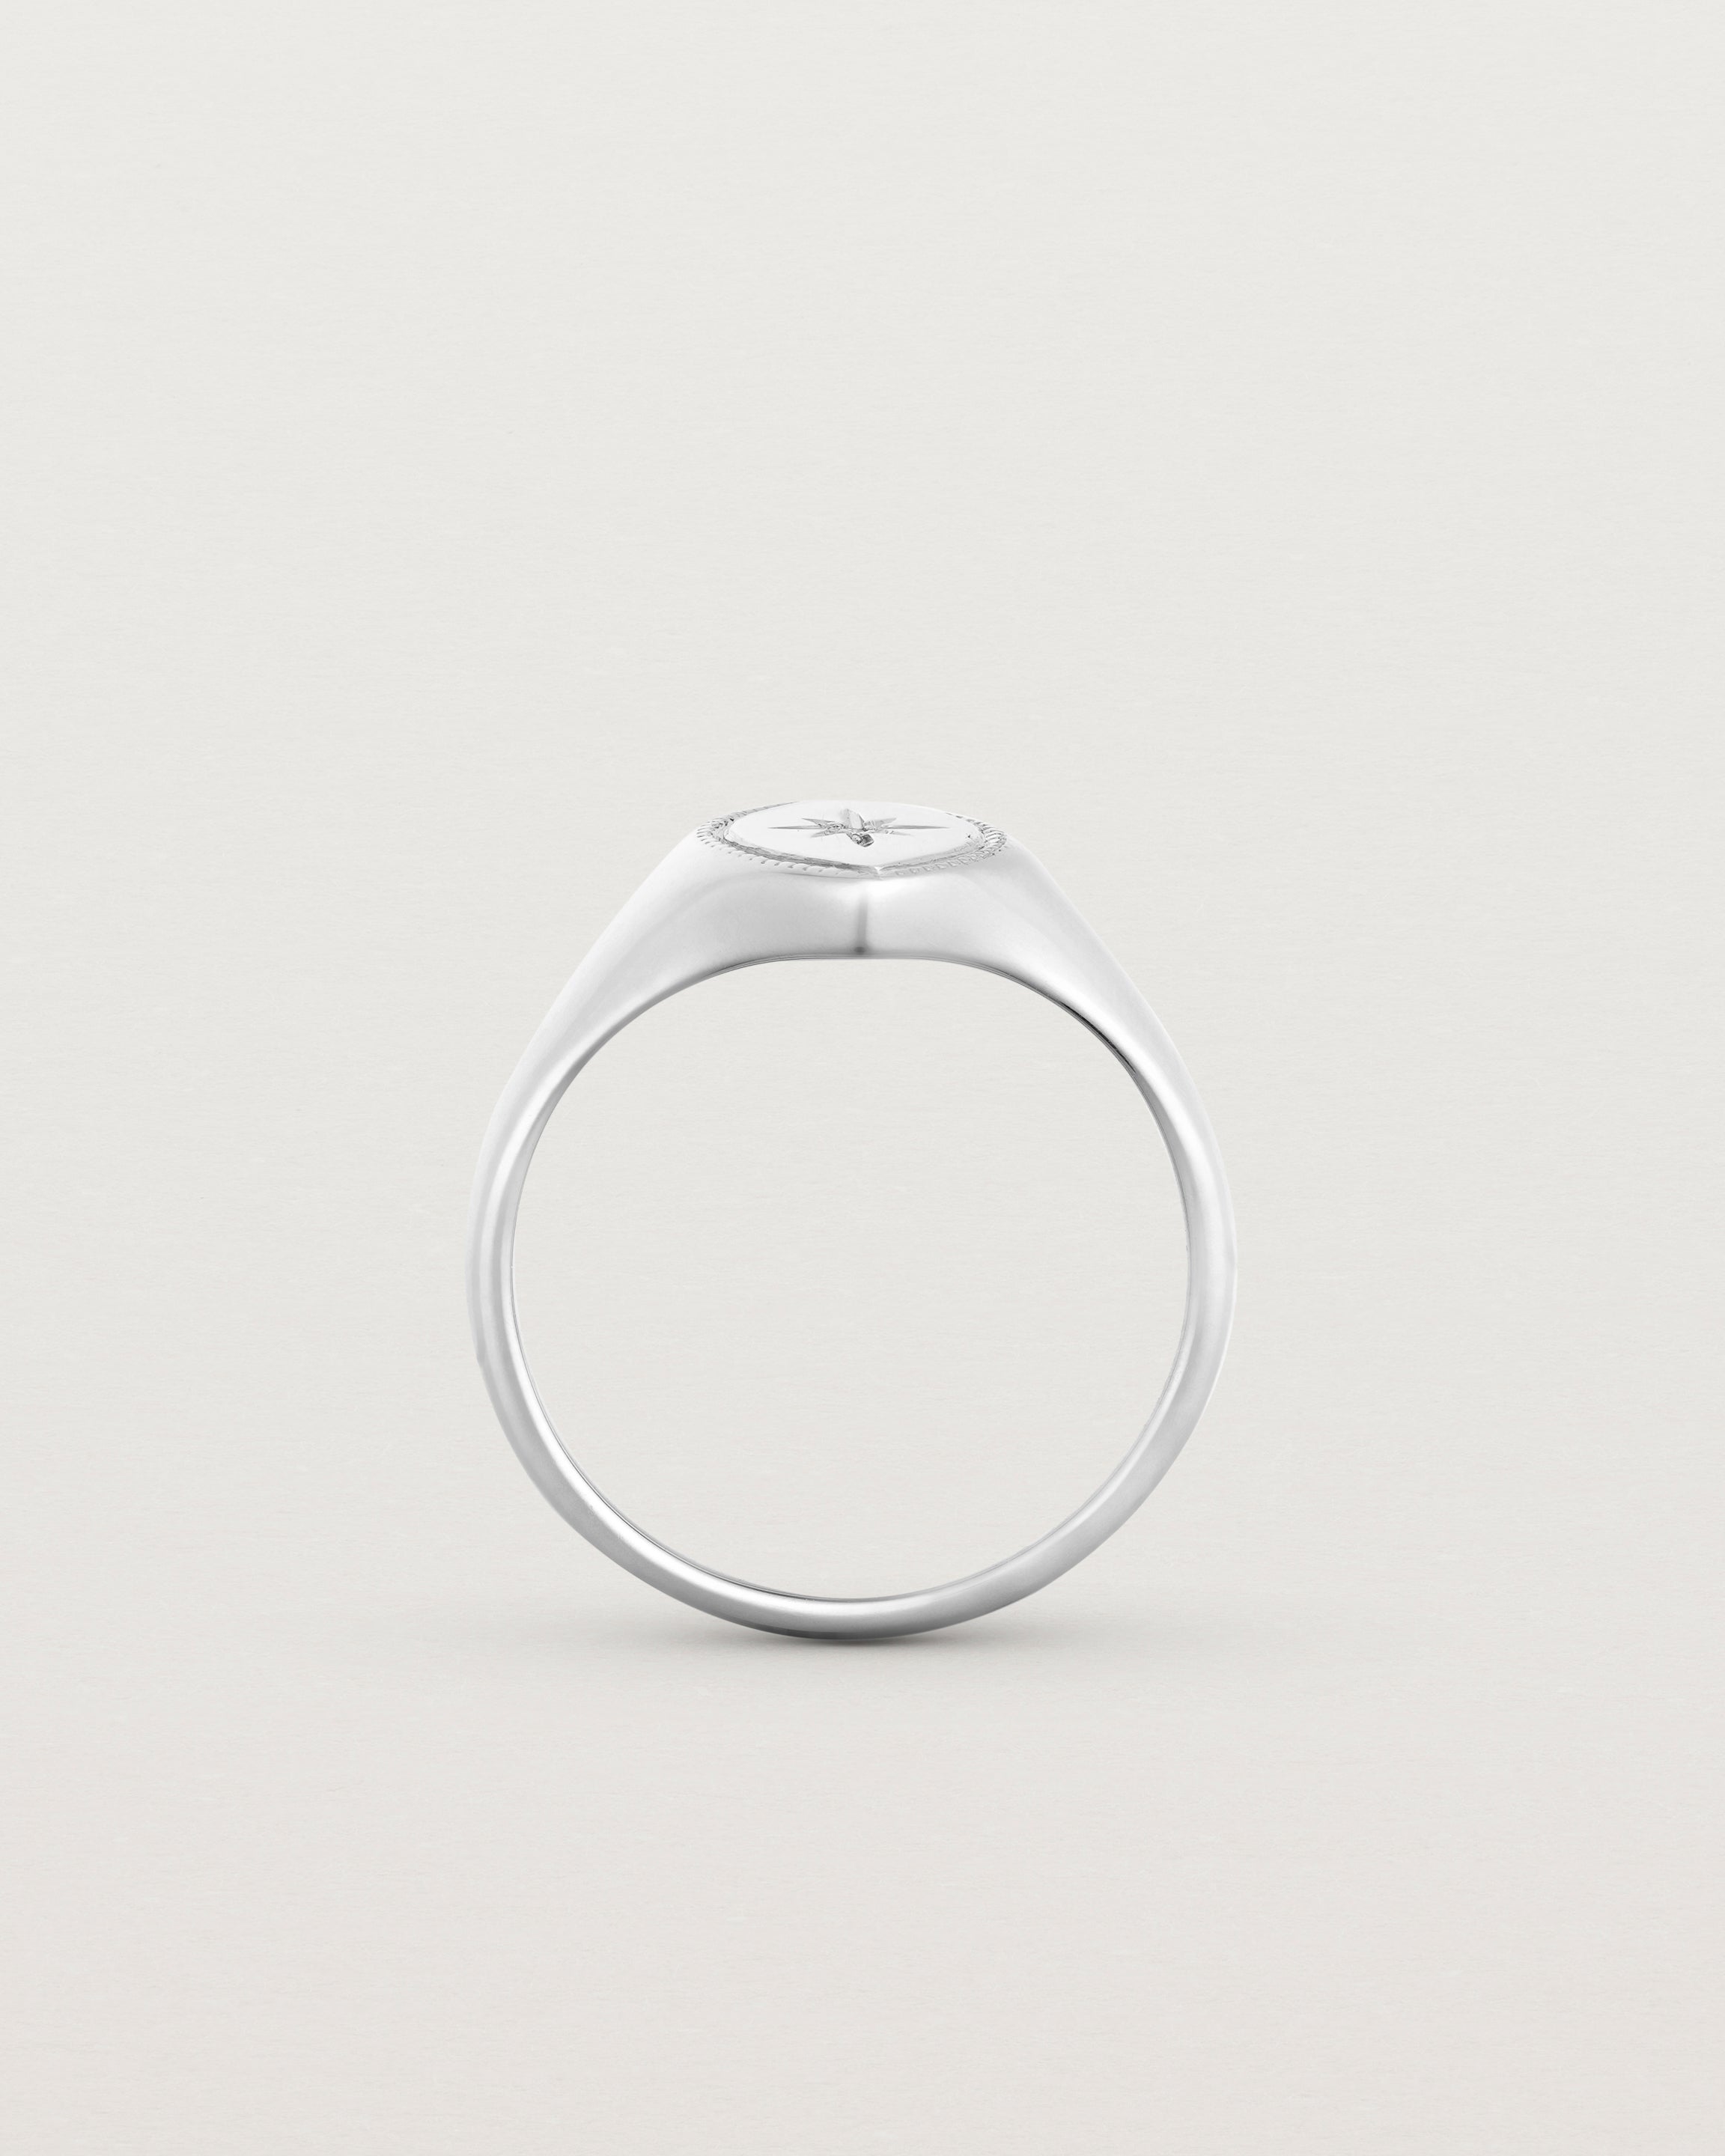 Standing view of the Willow Millgrain Signet Ring | Birthstone in white gold.